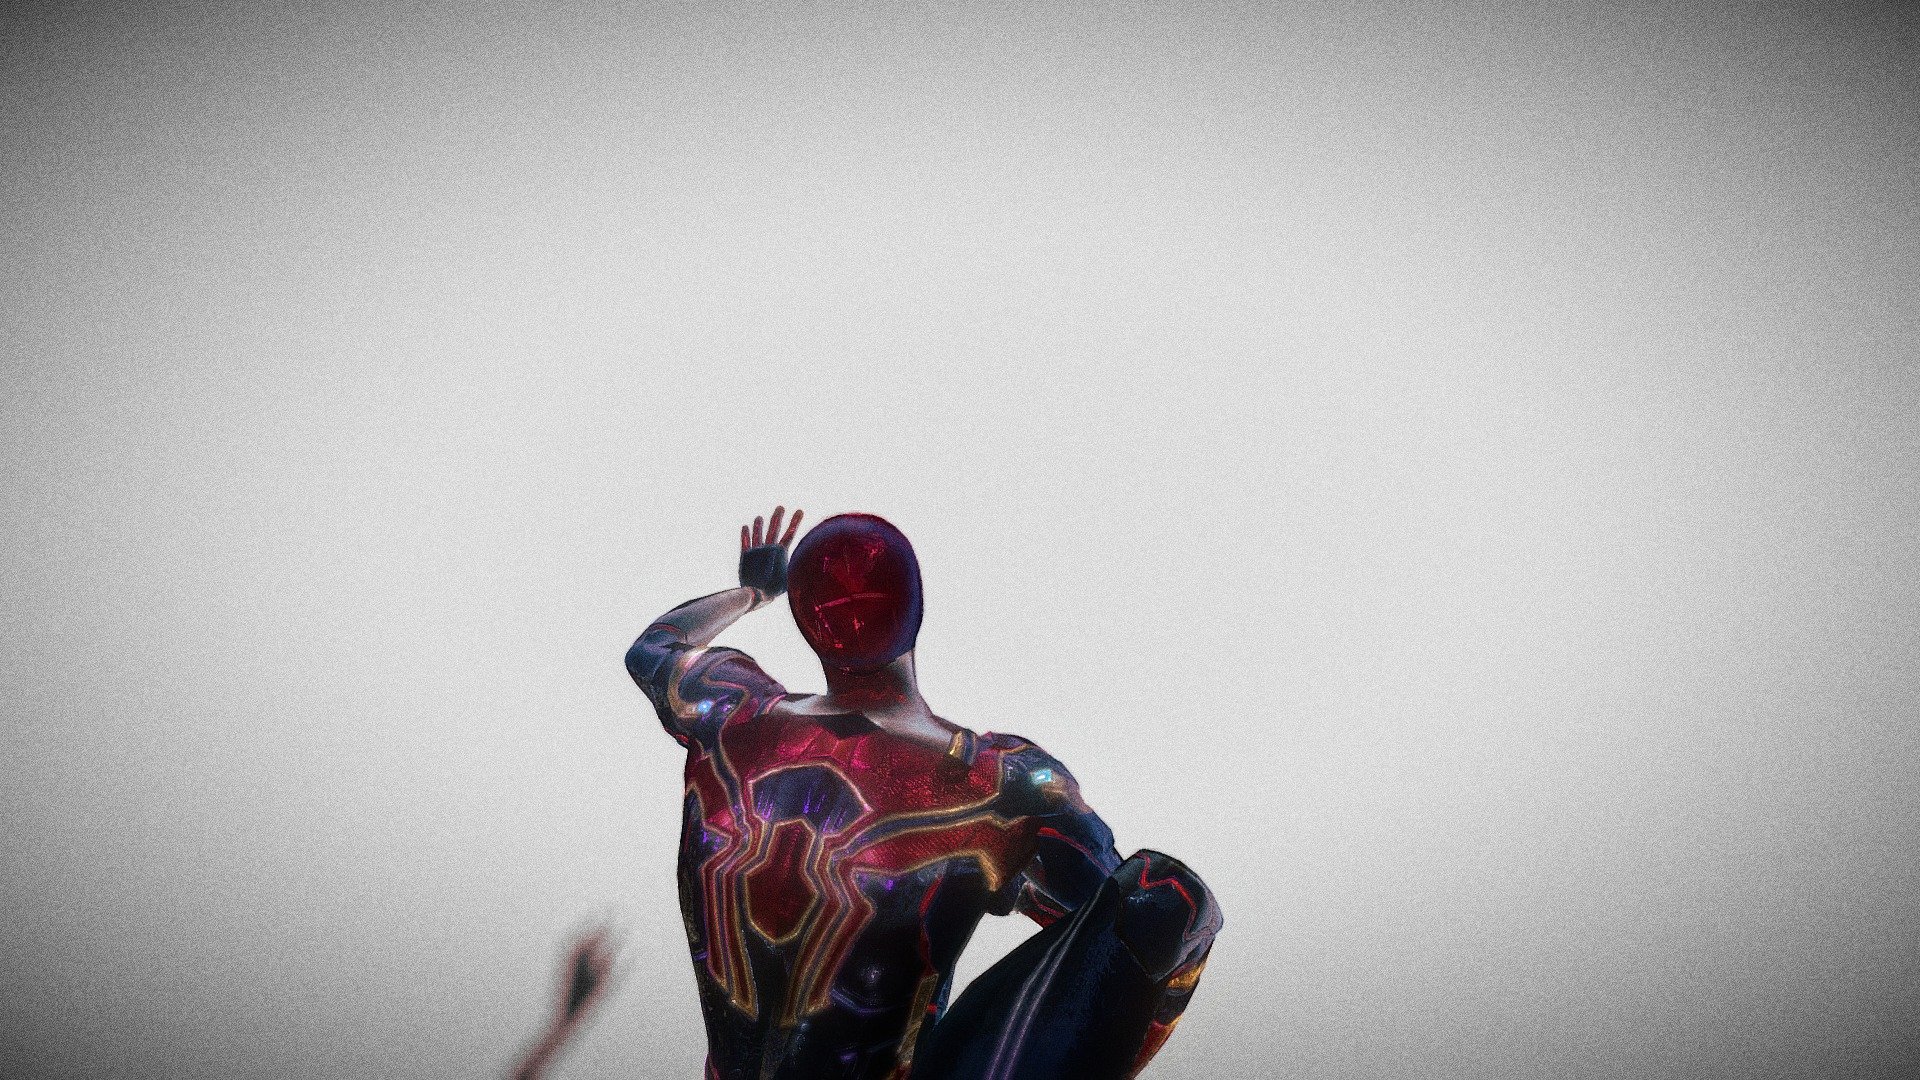 Guys here i am make iron spider man model for your creativity 
 Ues model an enjoy make your animation without any strike 

And ya this model make by phone 😅

for more models follow me
 And suggest me next model topic

file work in any software , app and prisma 3d - Iron spider man suite - Download Free 3D model by Itx prince (@sundar94116) 3d model